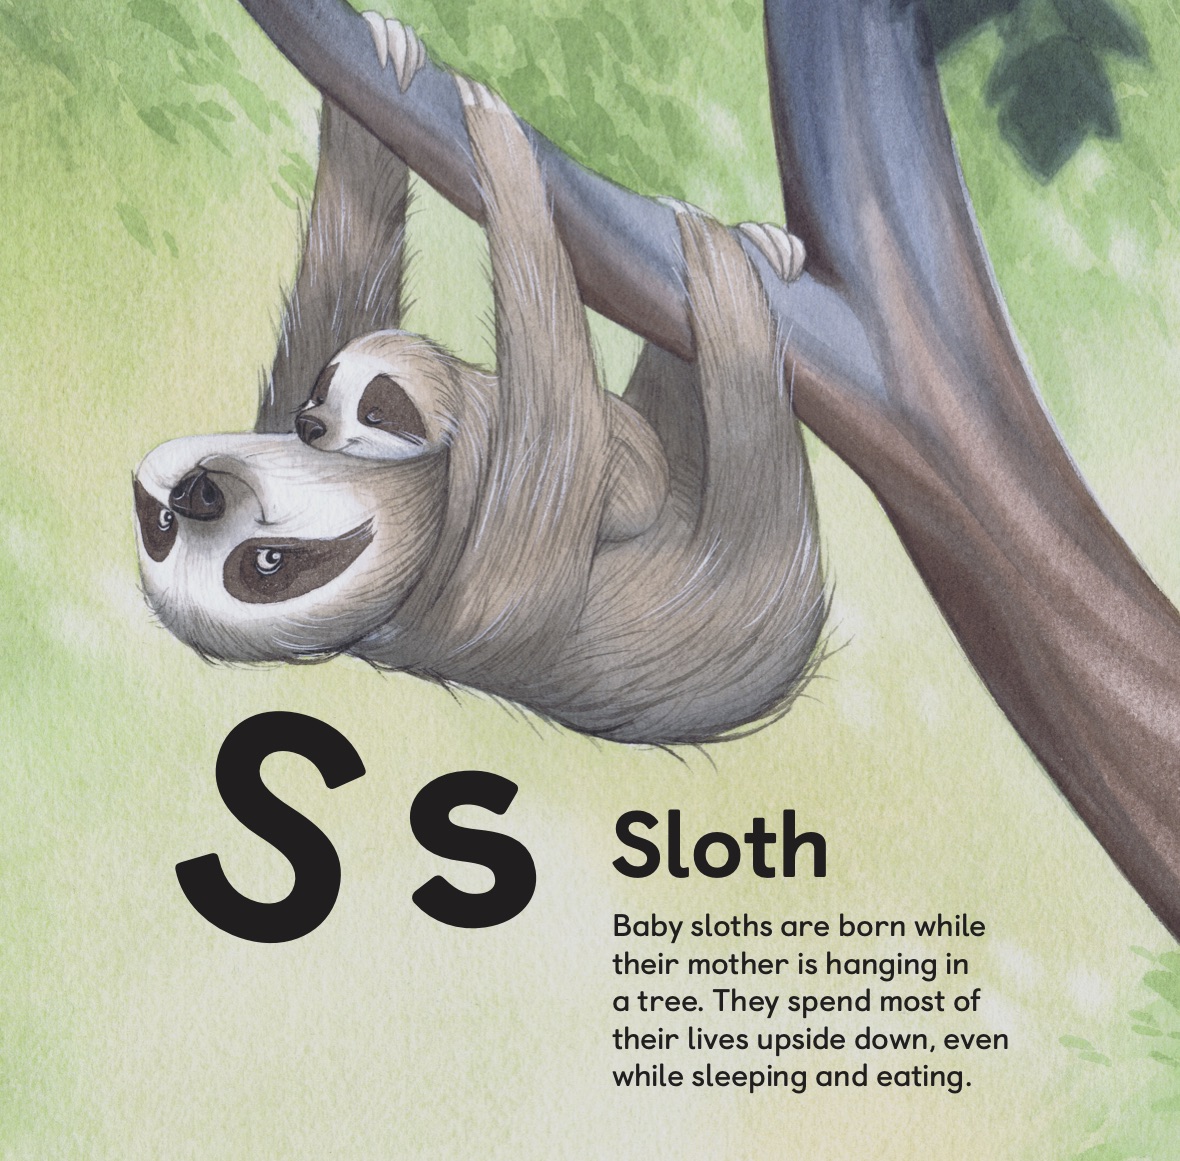 Sloth mom hanging with baby sloth